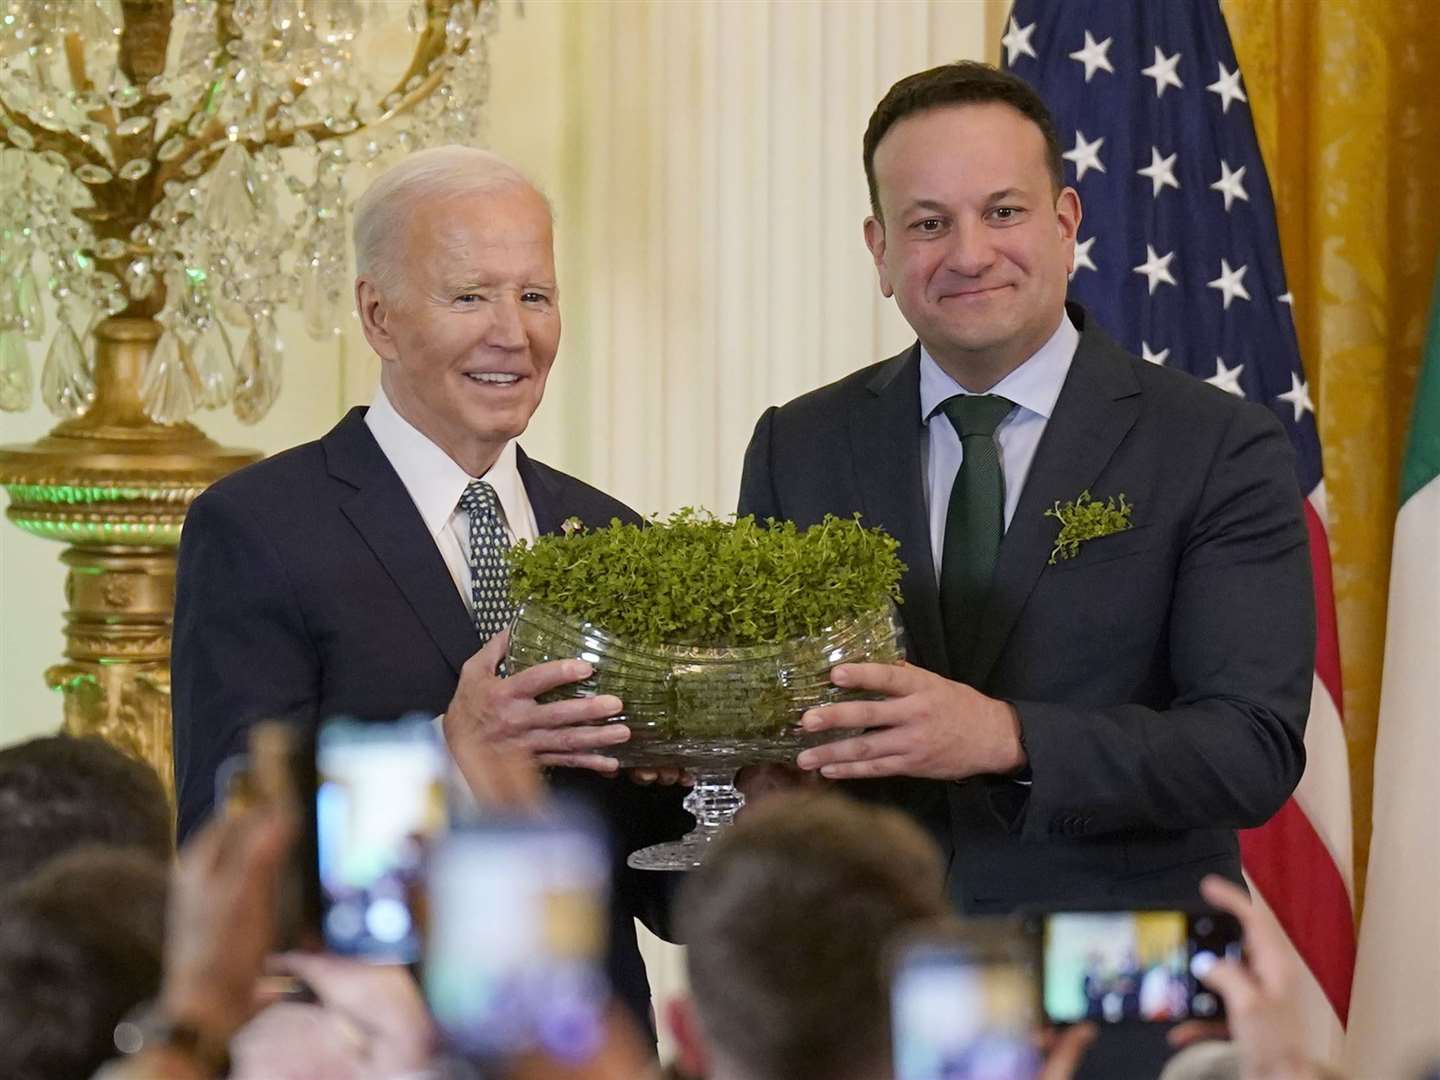 Meanwhile, across the pond, US President Joe Biden and Ireland’s Taoiseach Leo Varadkar attended the St Patrick’s Day Reception and Shamrock Ceremony in the East Room of the White House (Niall Carson/PA)